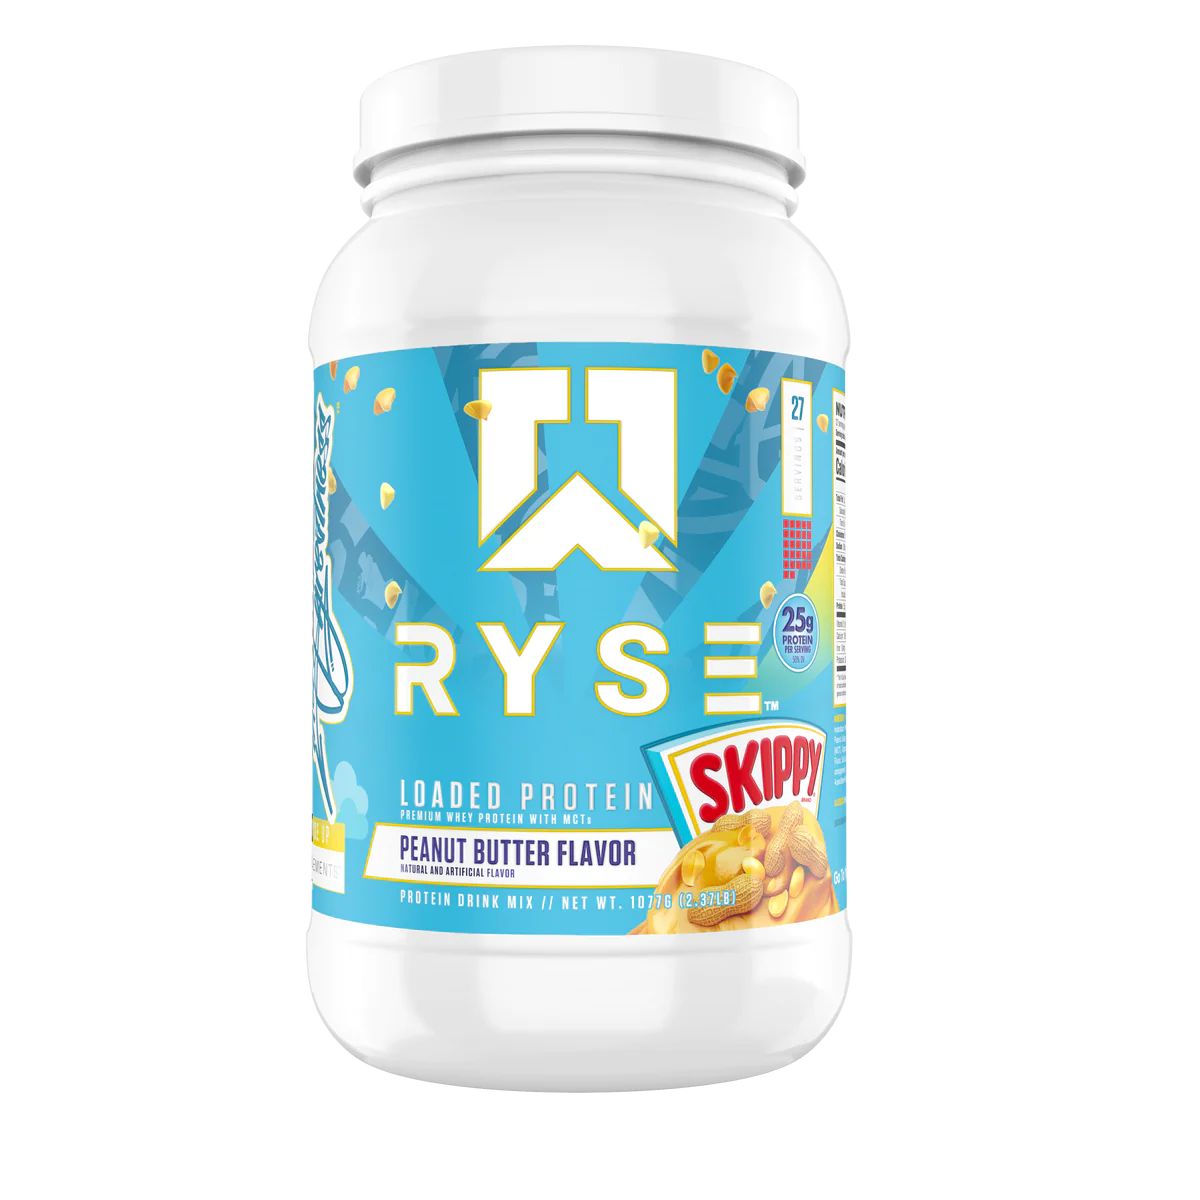 Ryse Skippy Peanut Butter Flavour Loaded Protein 27 Servings